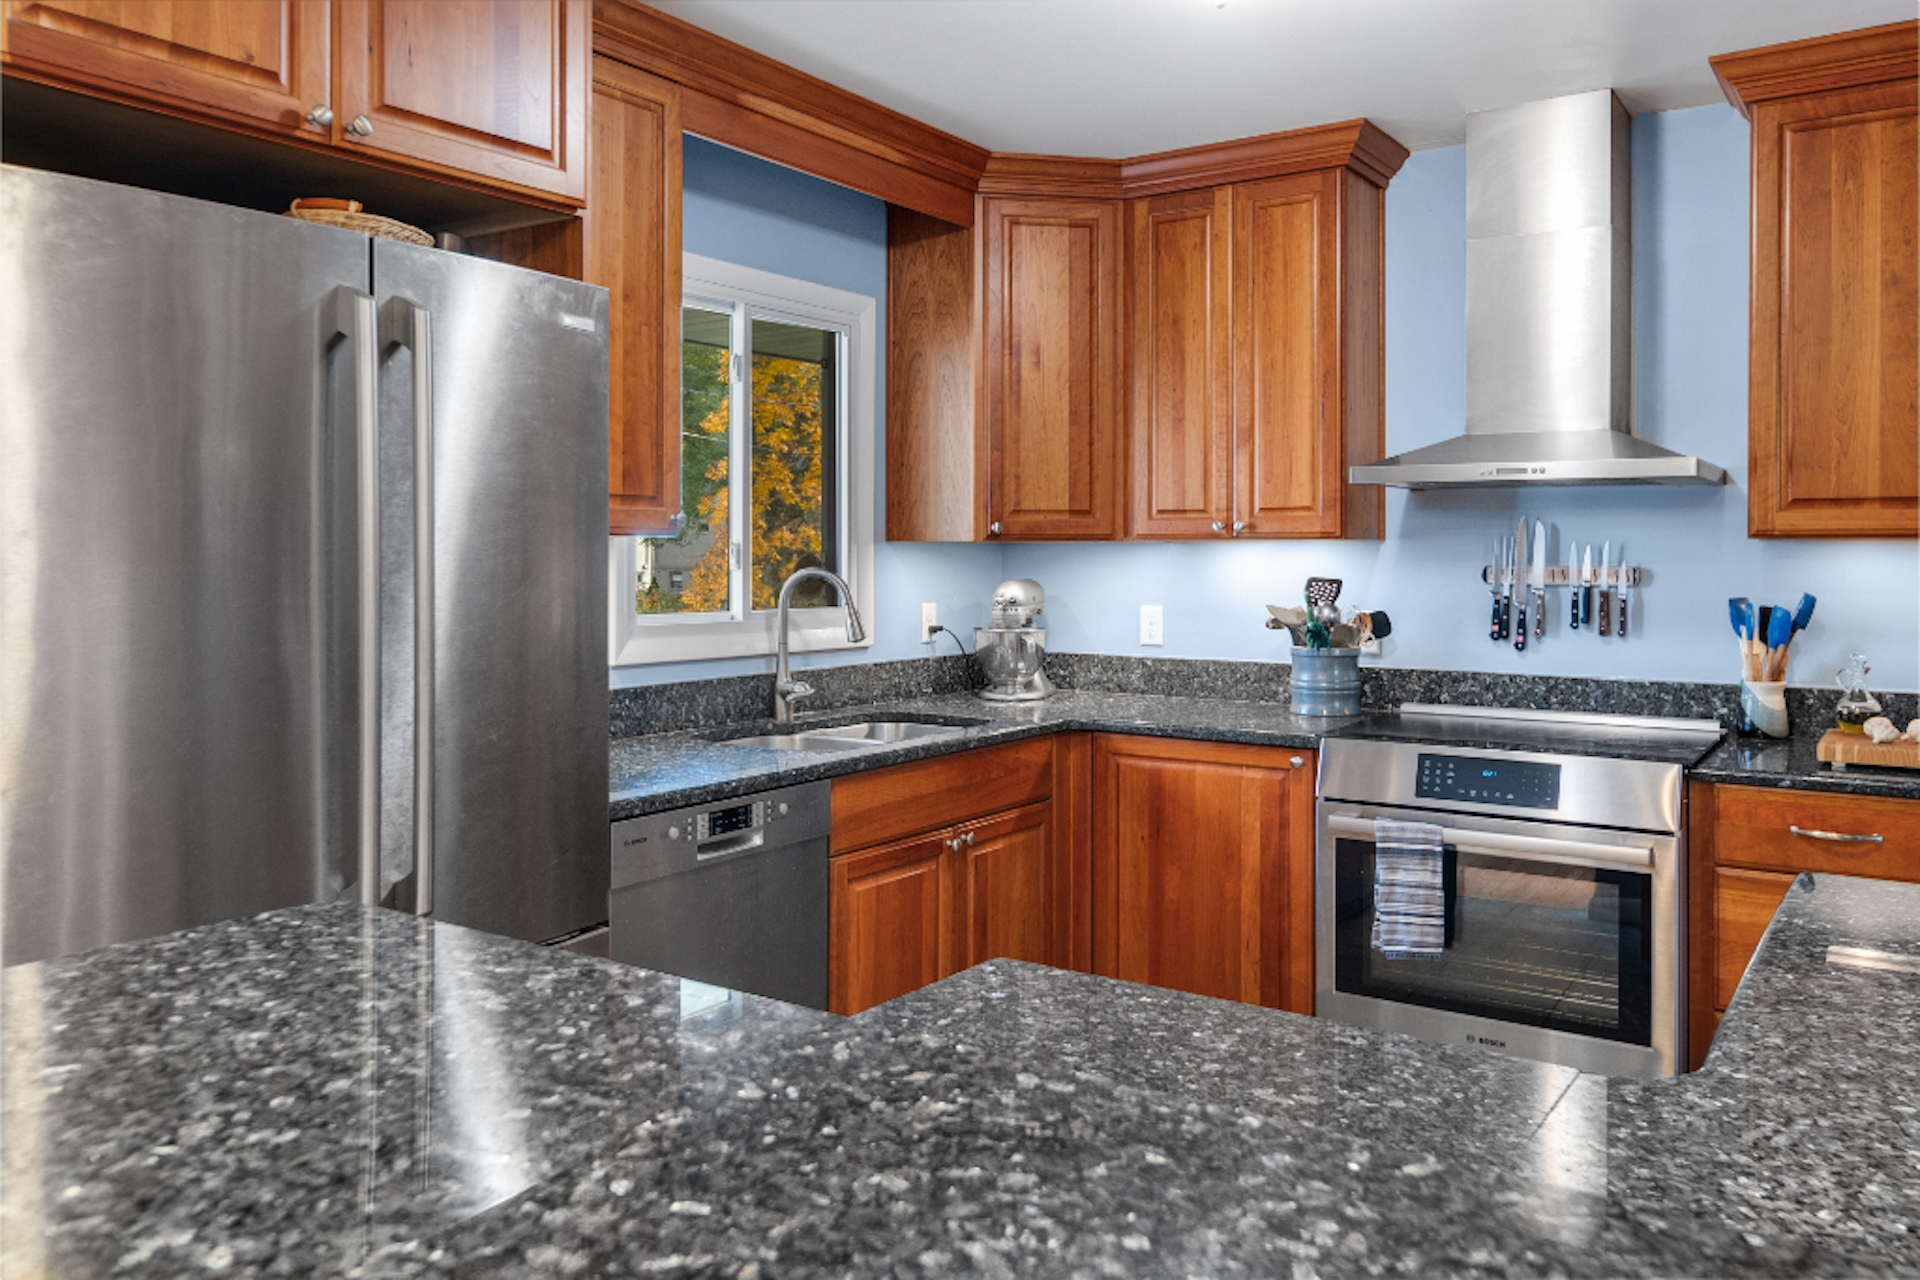 Kitchen with granite countertops and wood cabinets